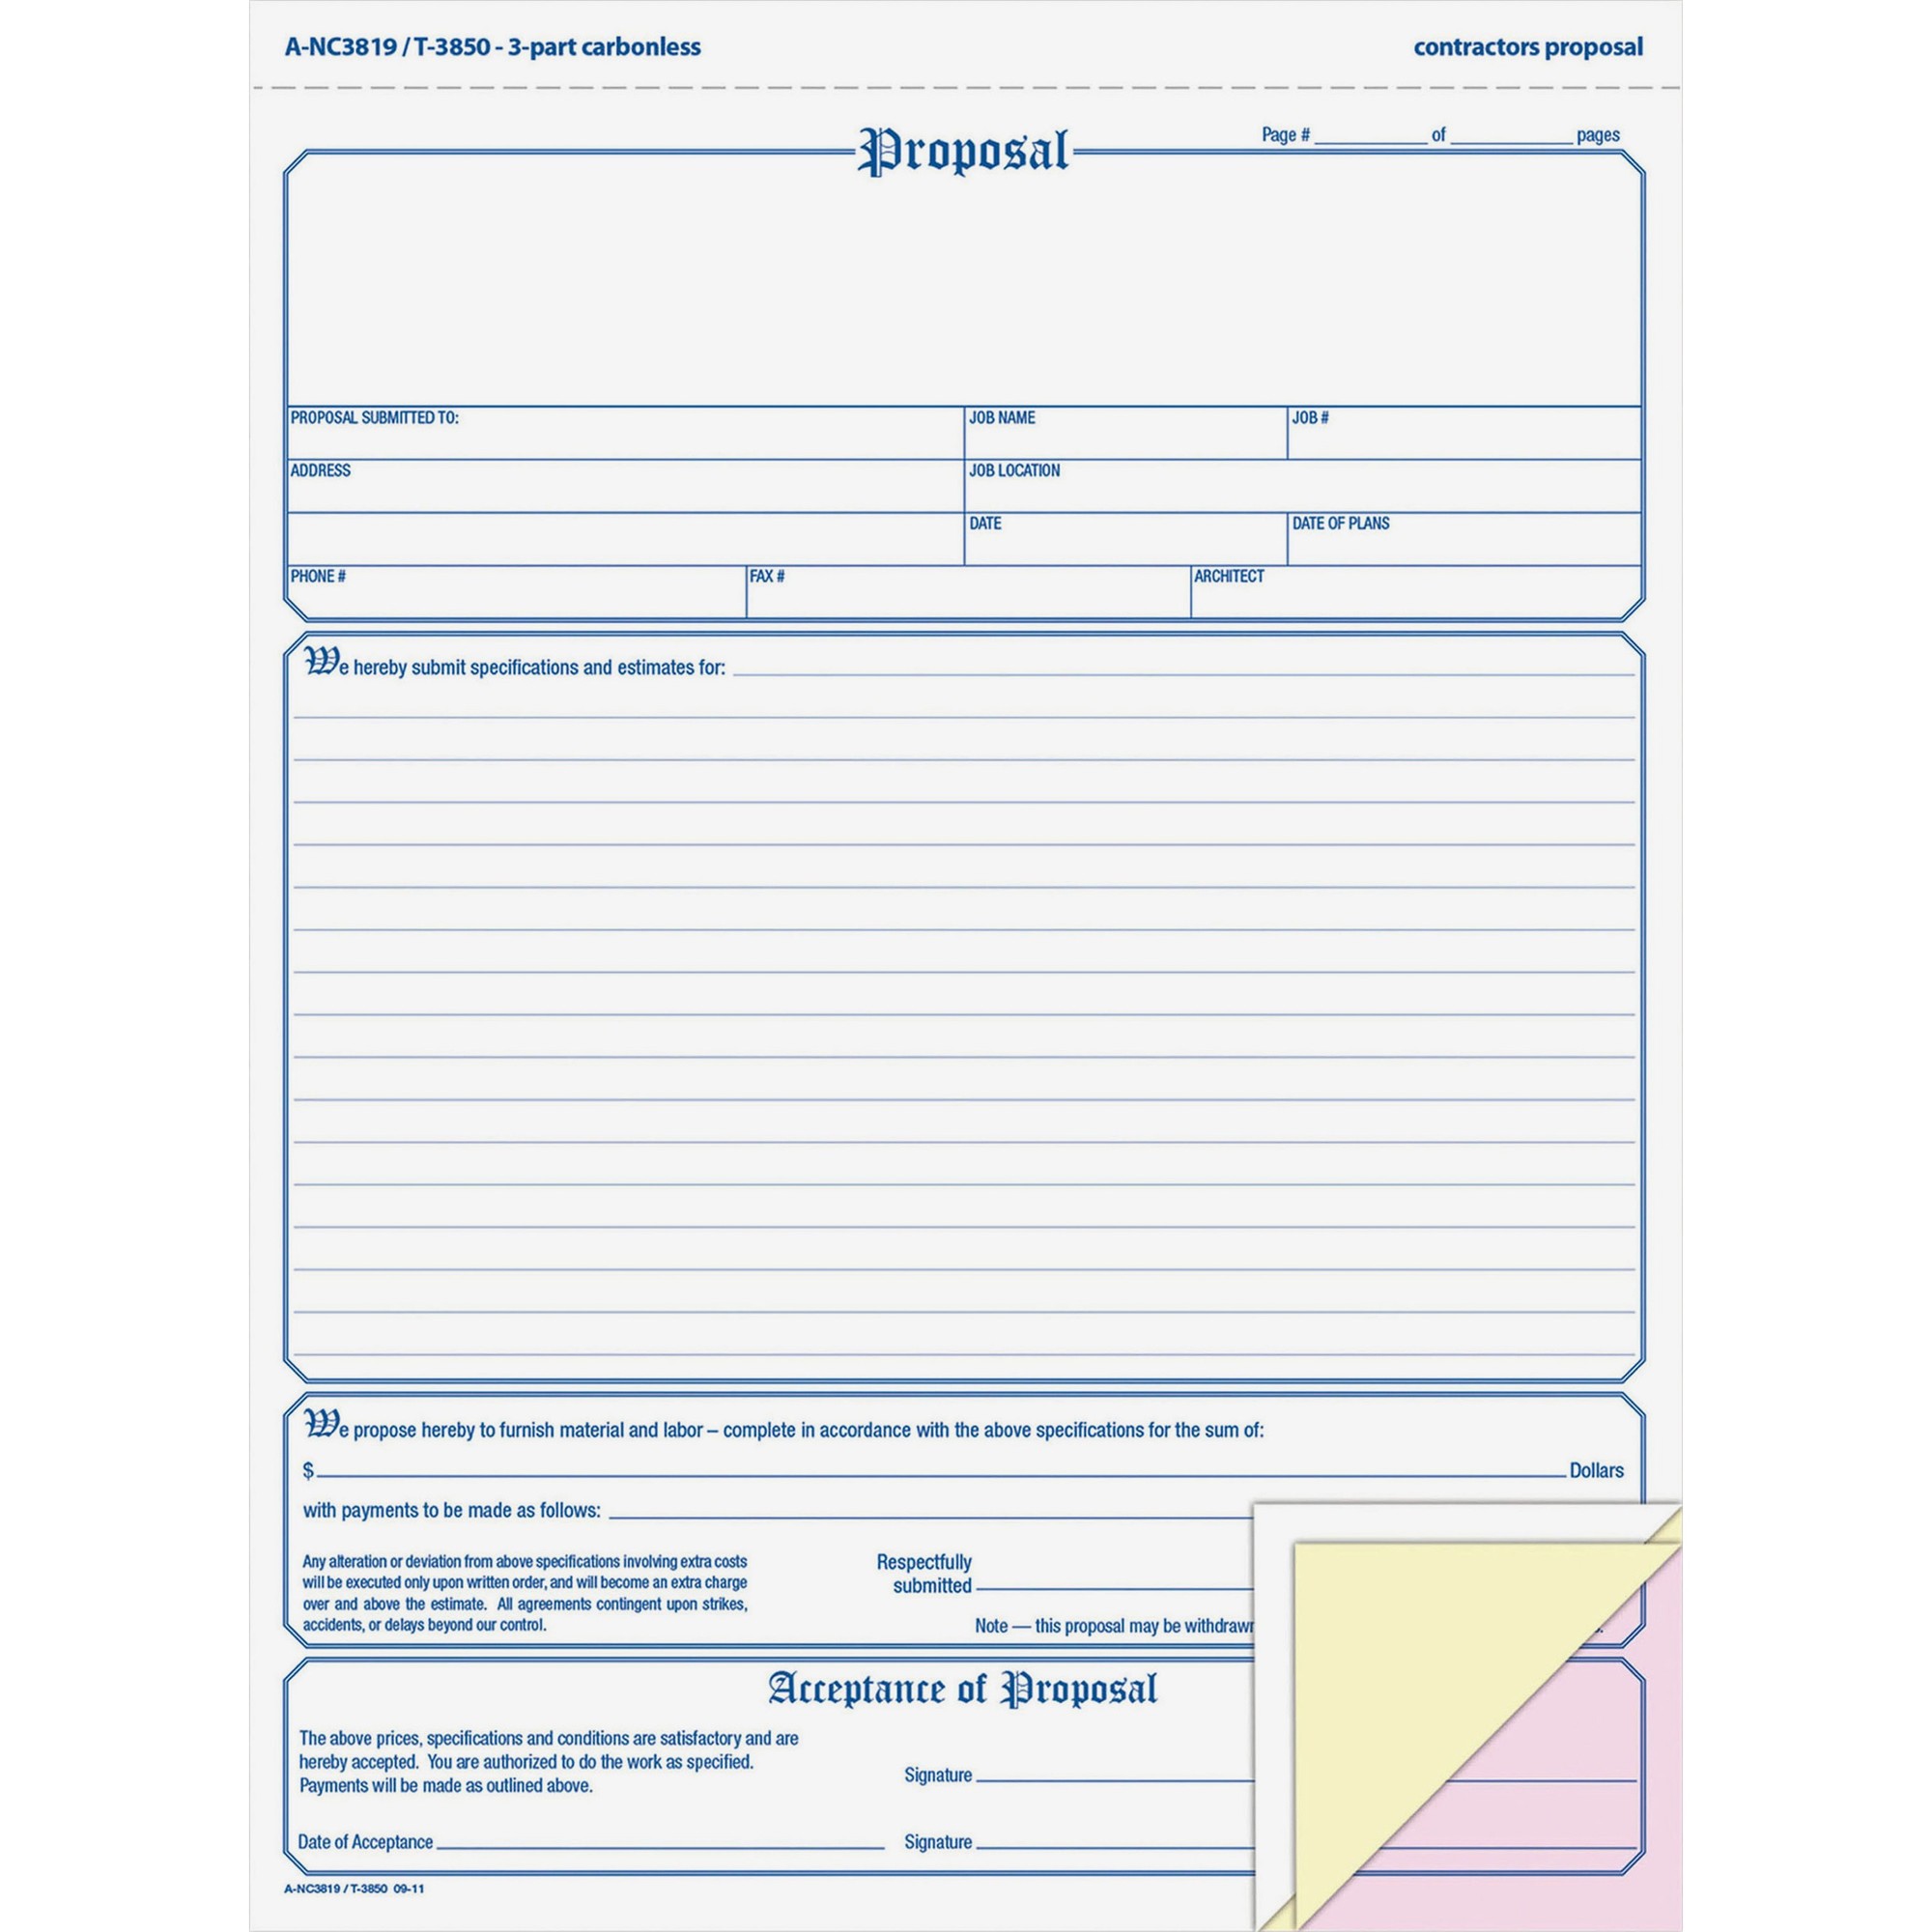 Contractor Proposal Form, 3-Part Carbonless, 8 1/2 x 11 7/16, 50 Forms